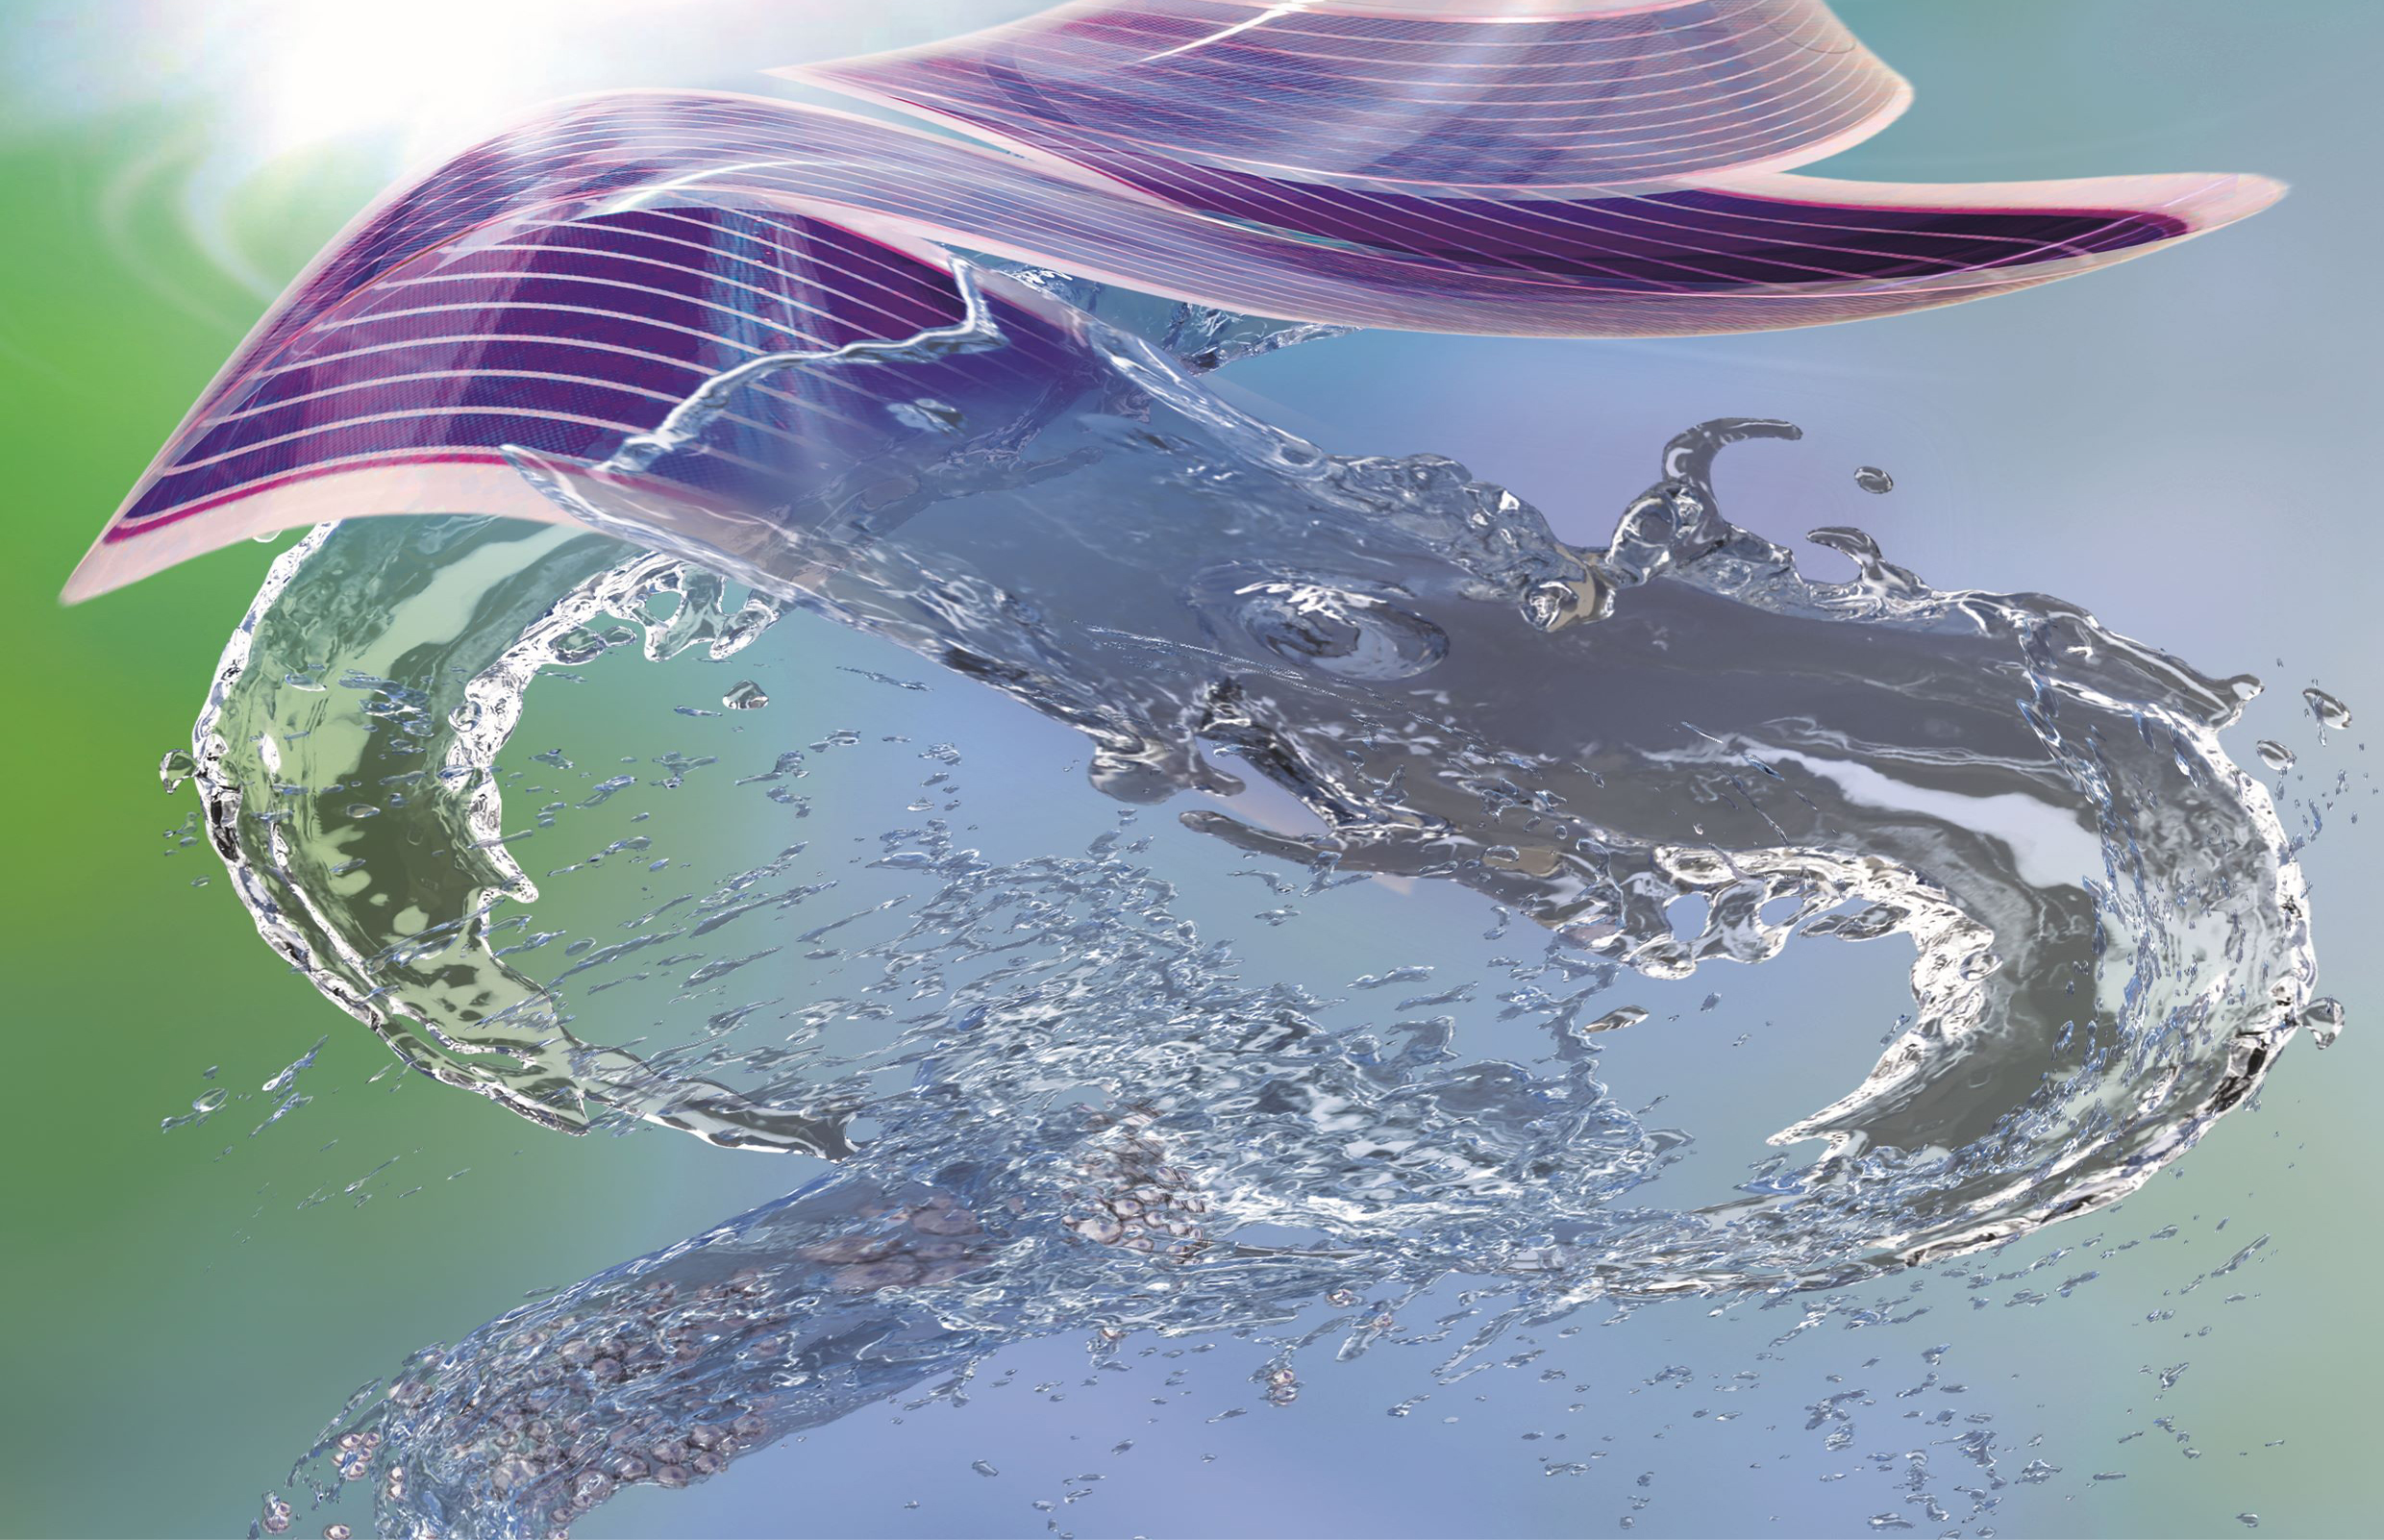 Cover art showing a spiral of organic photovoltaic film that transitions into splashing streams of clear water, with clumps of nanoparticles visible near the bottom of the water stream.